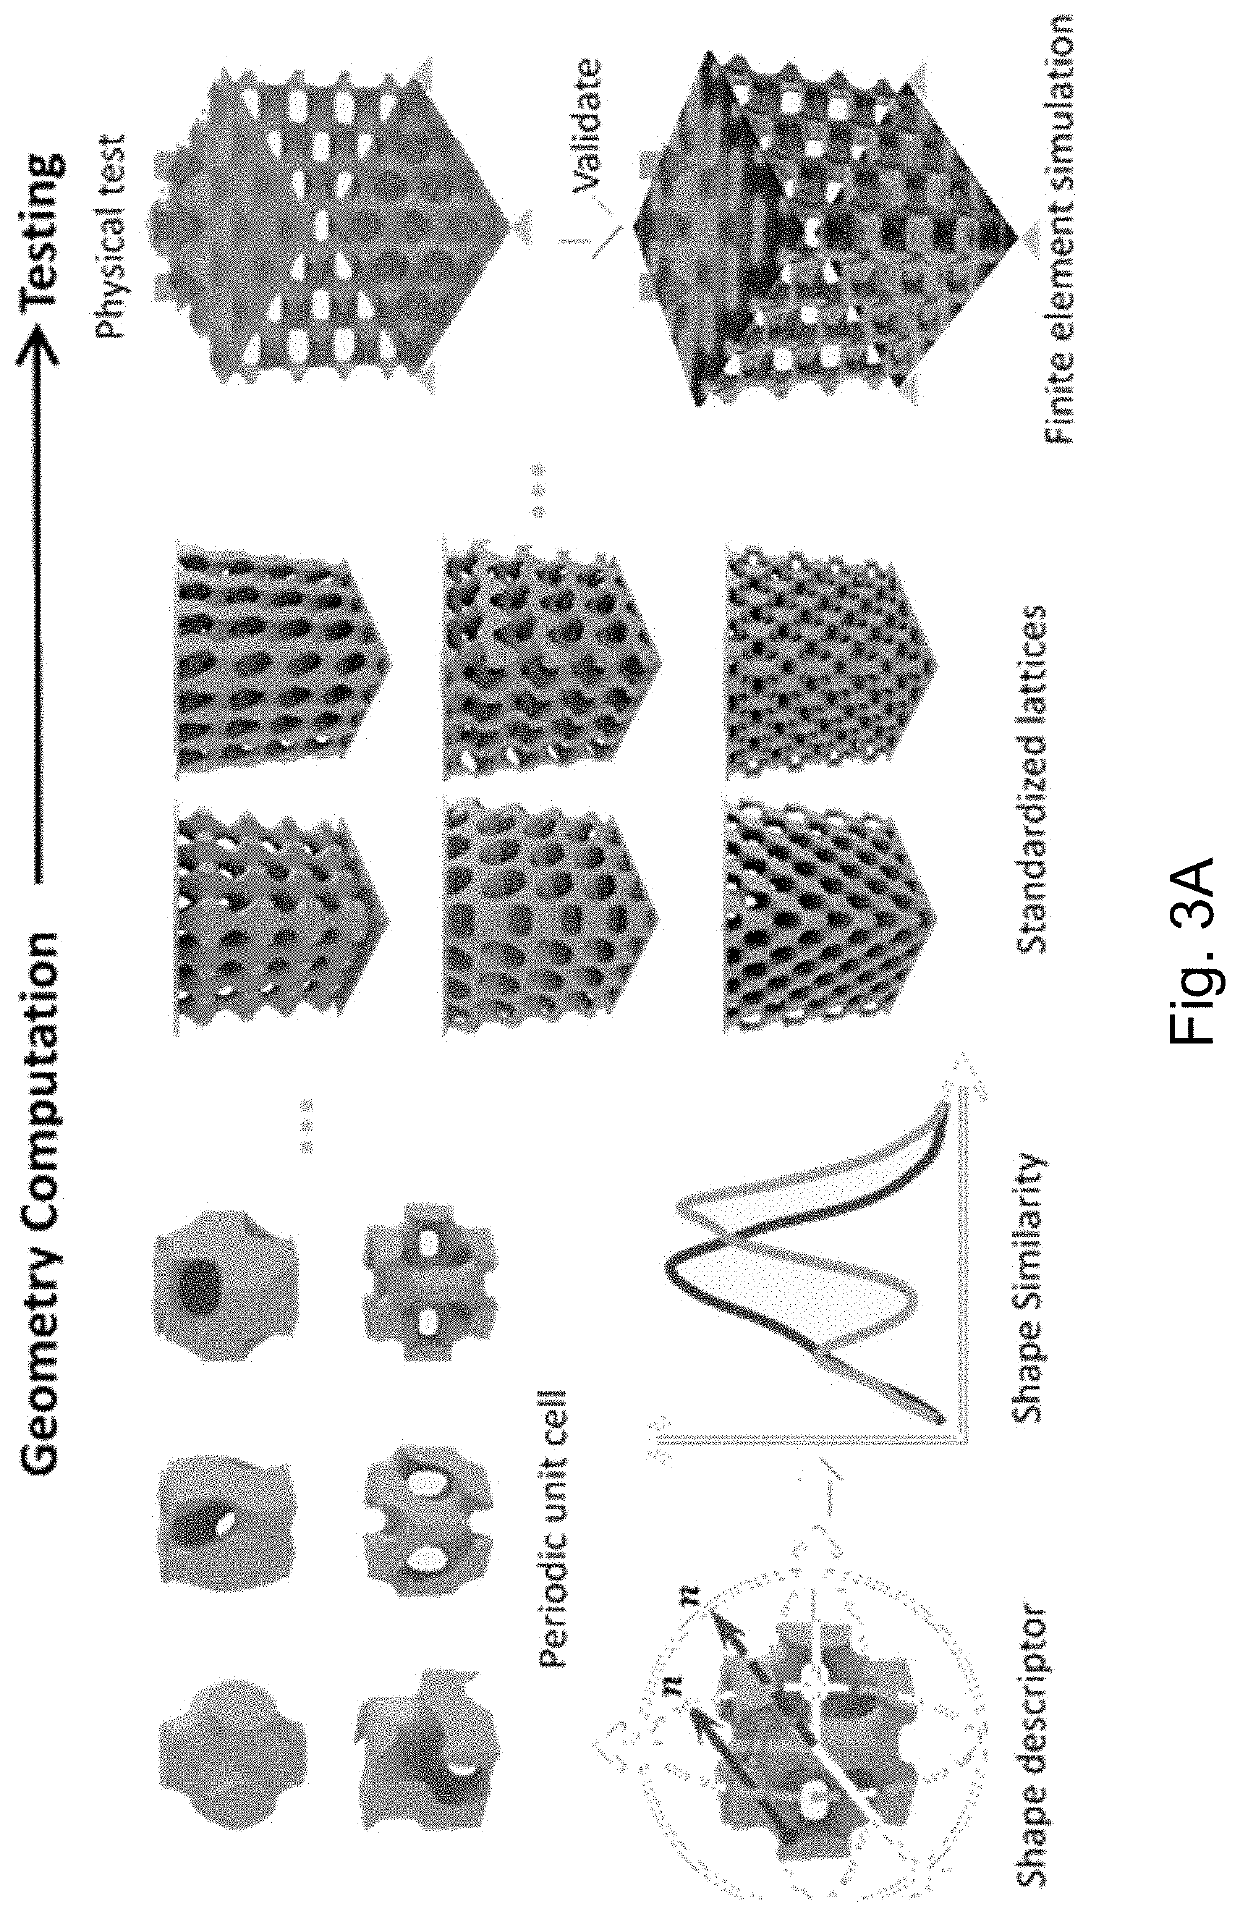 Periodic Cellular Structure Based Design for Additive Manufacturing Approach for Light Weighting and Optimizing Strong Functional Parts